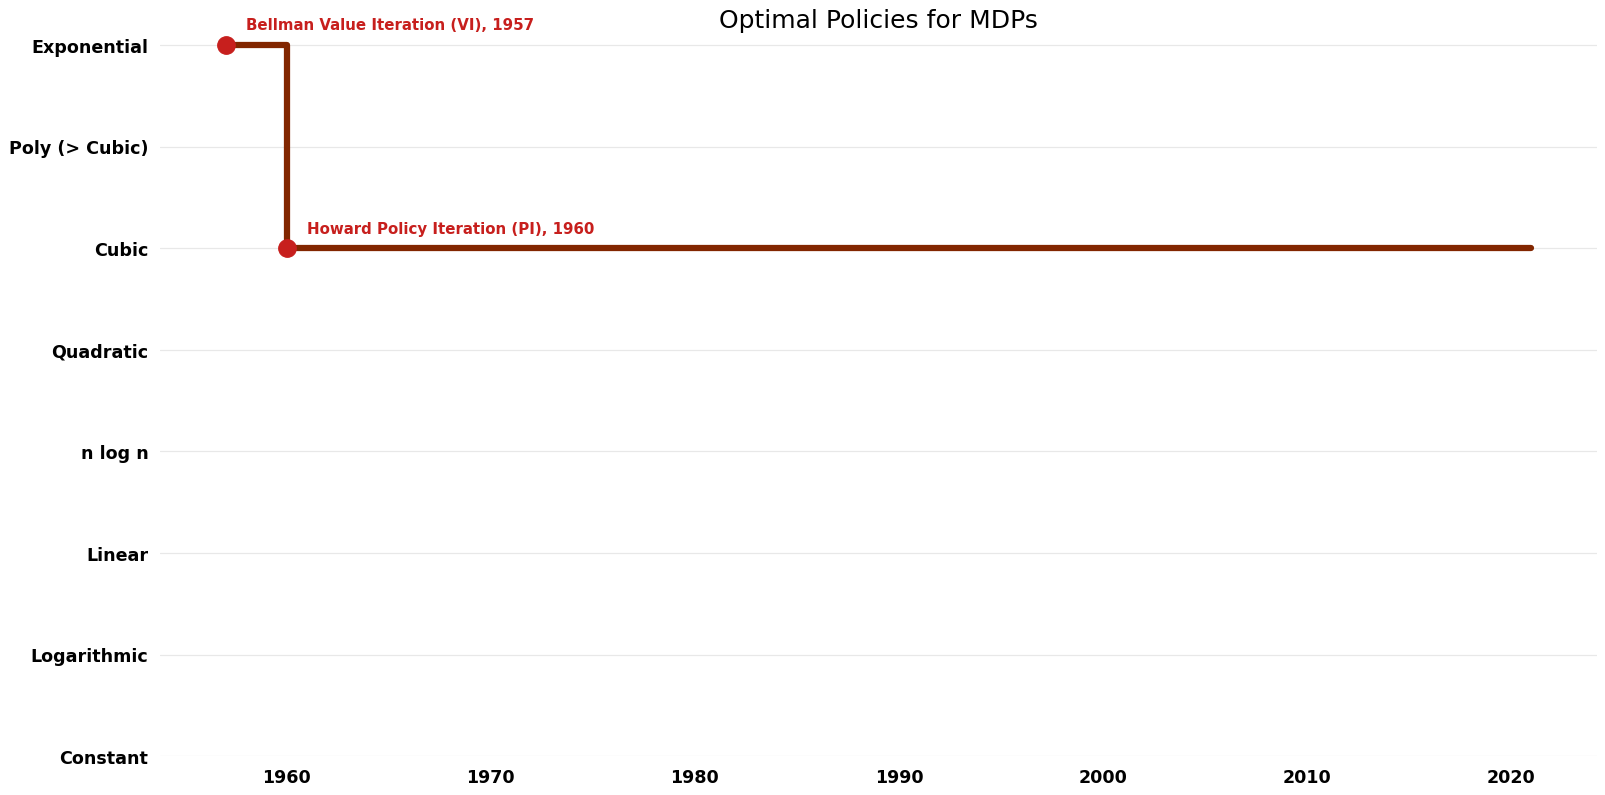 File:Optimal Policies for MDPs - Time.png